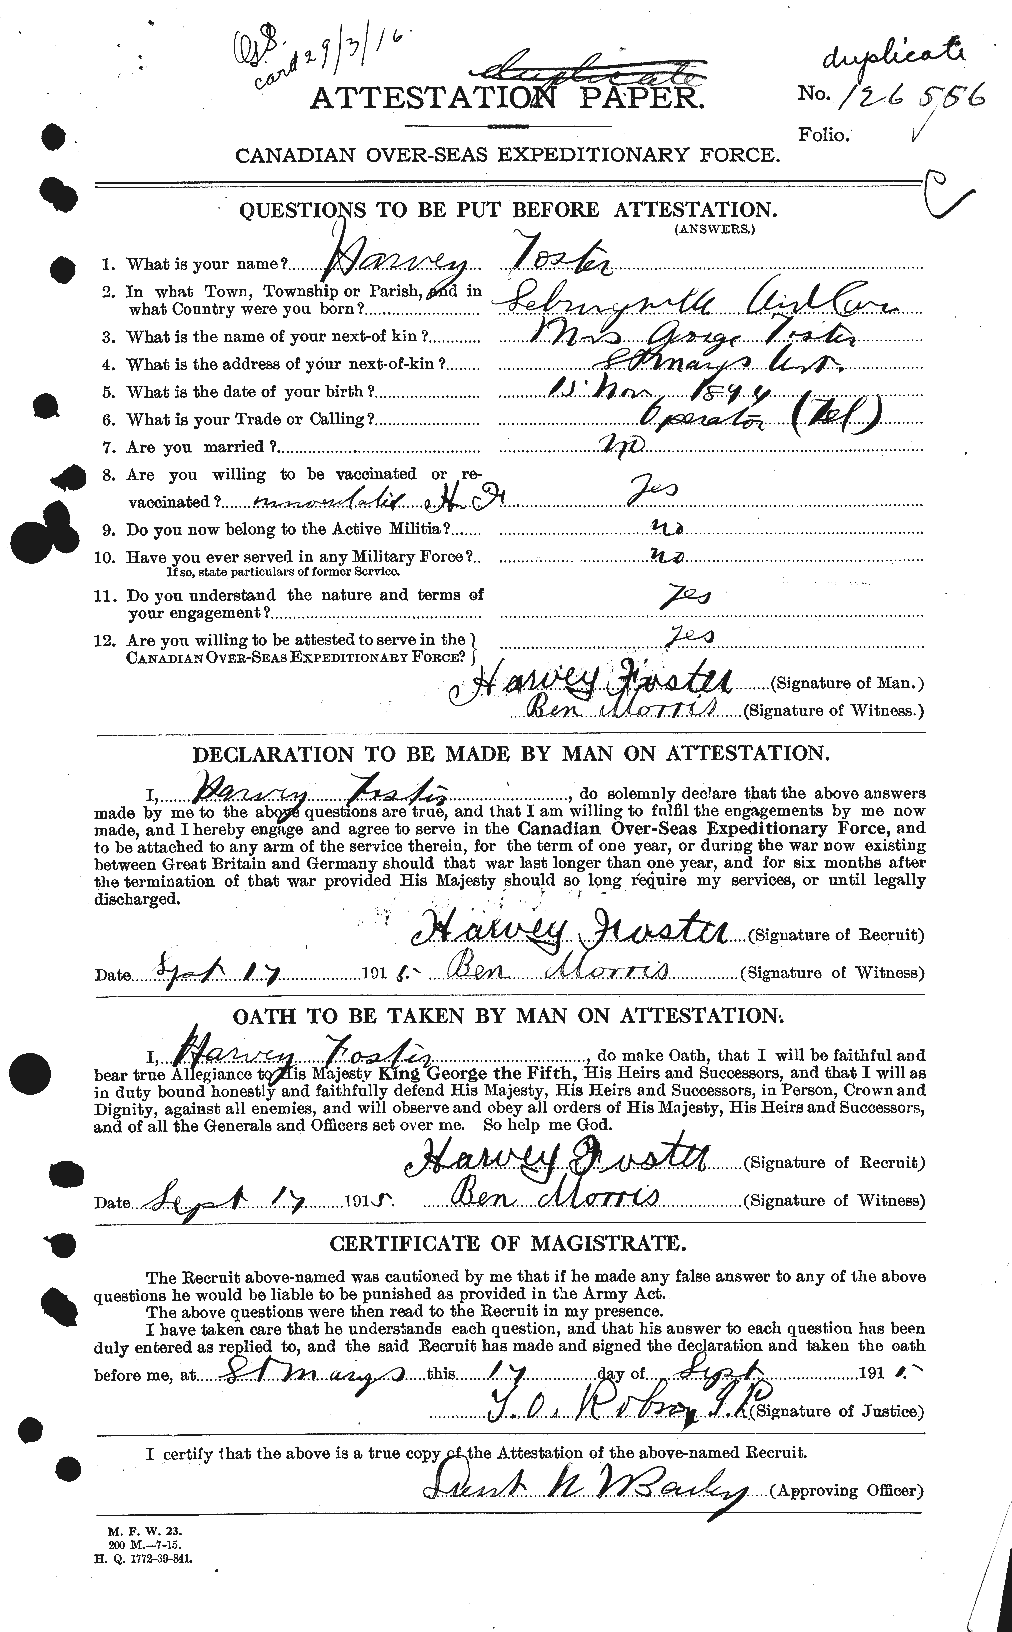 Personnel Records of the First World War - CEF 333235a